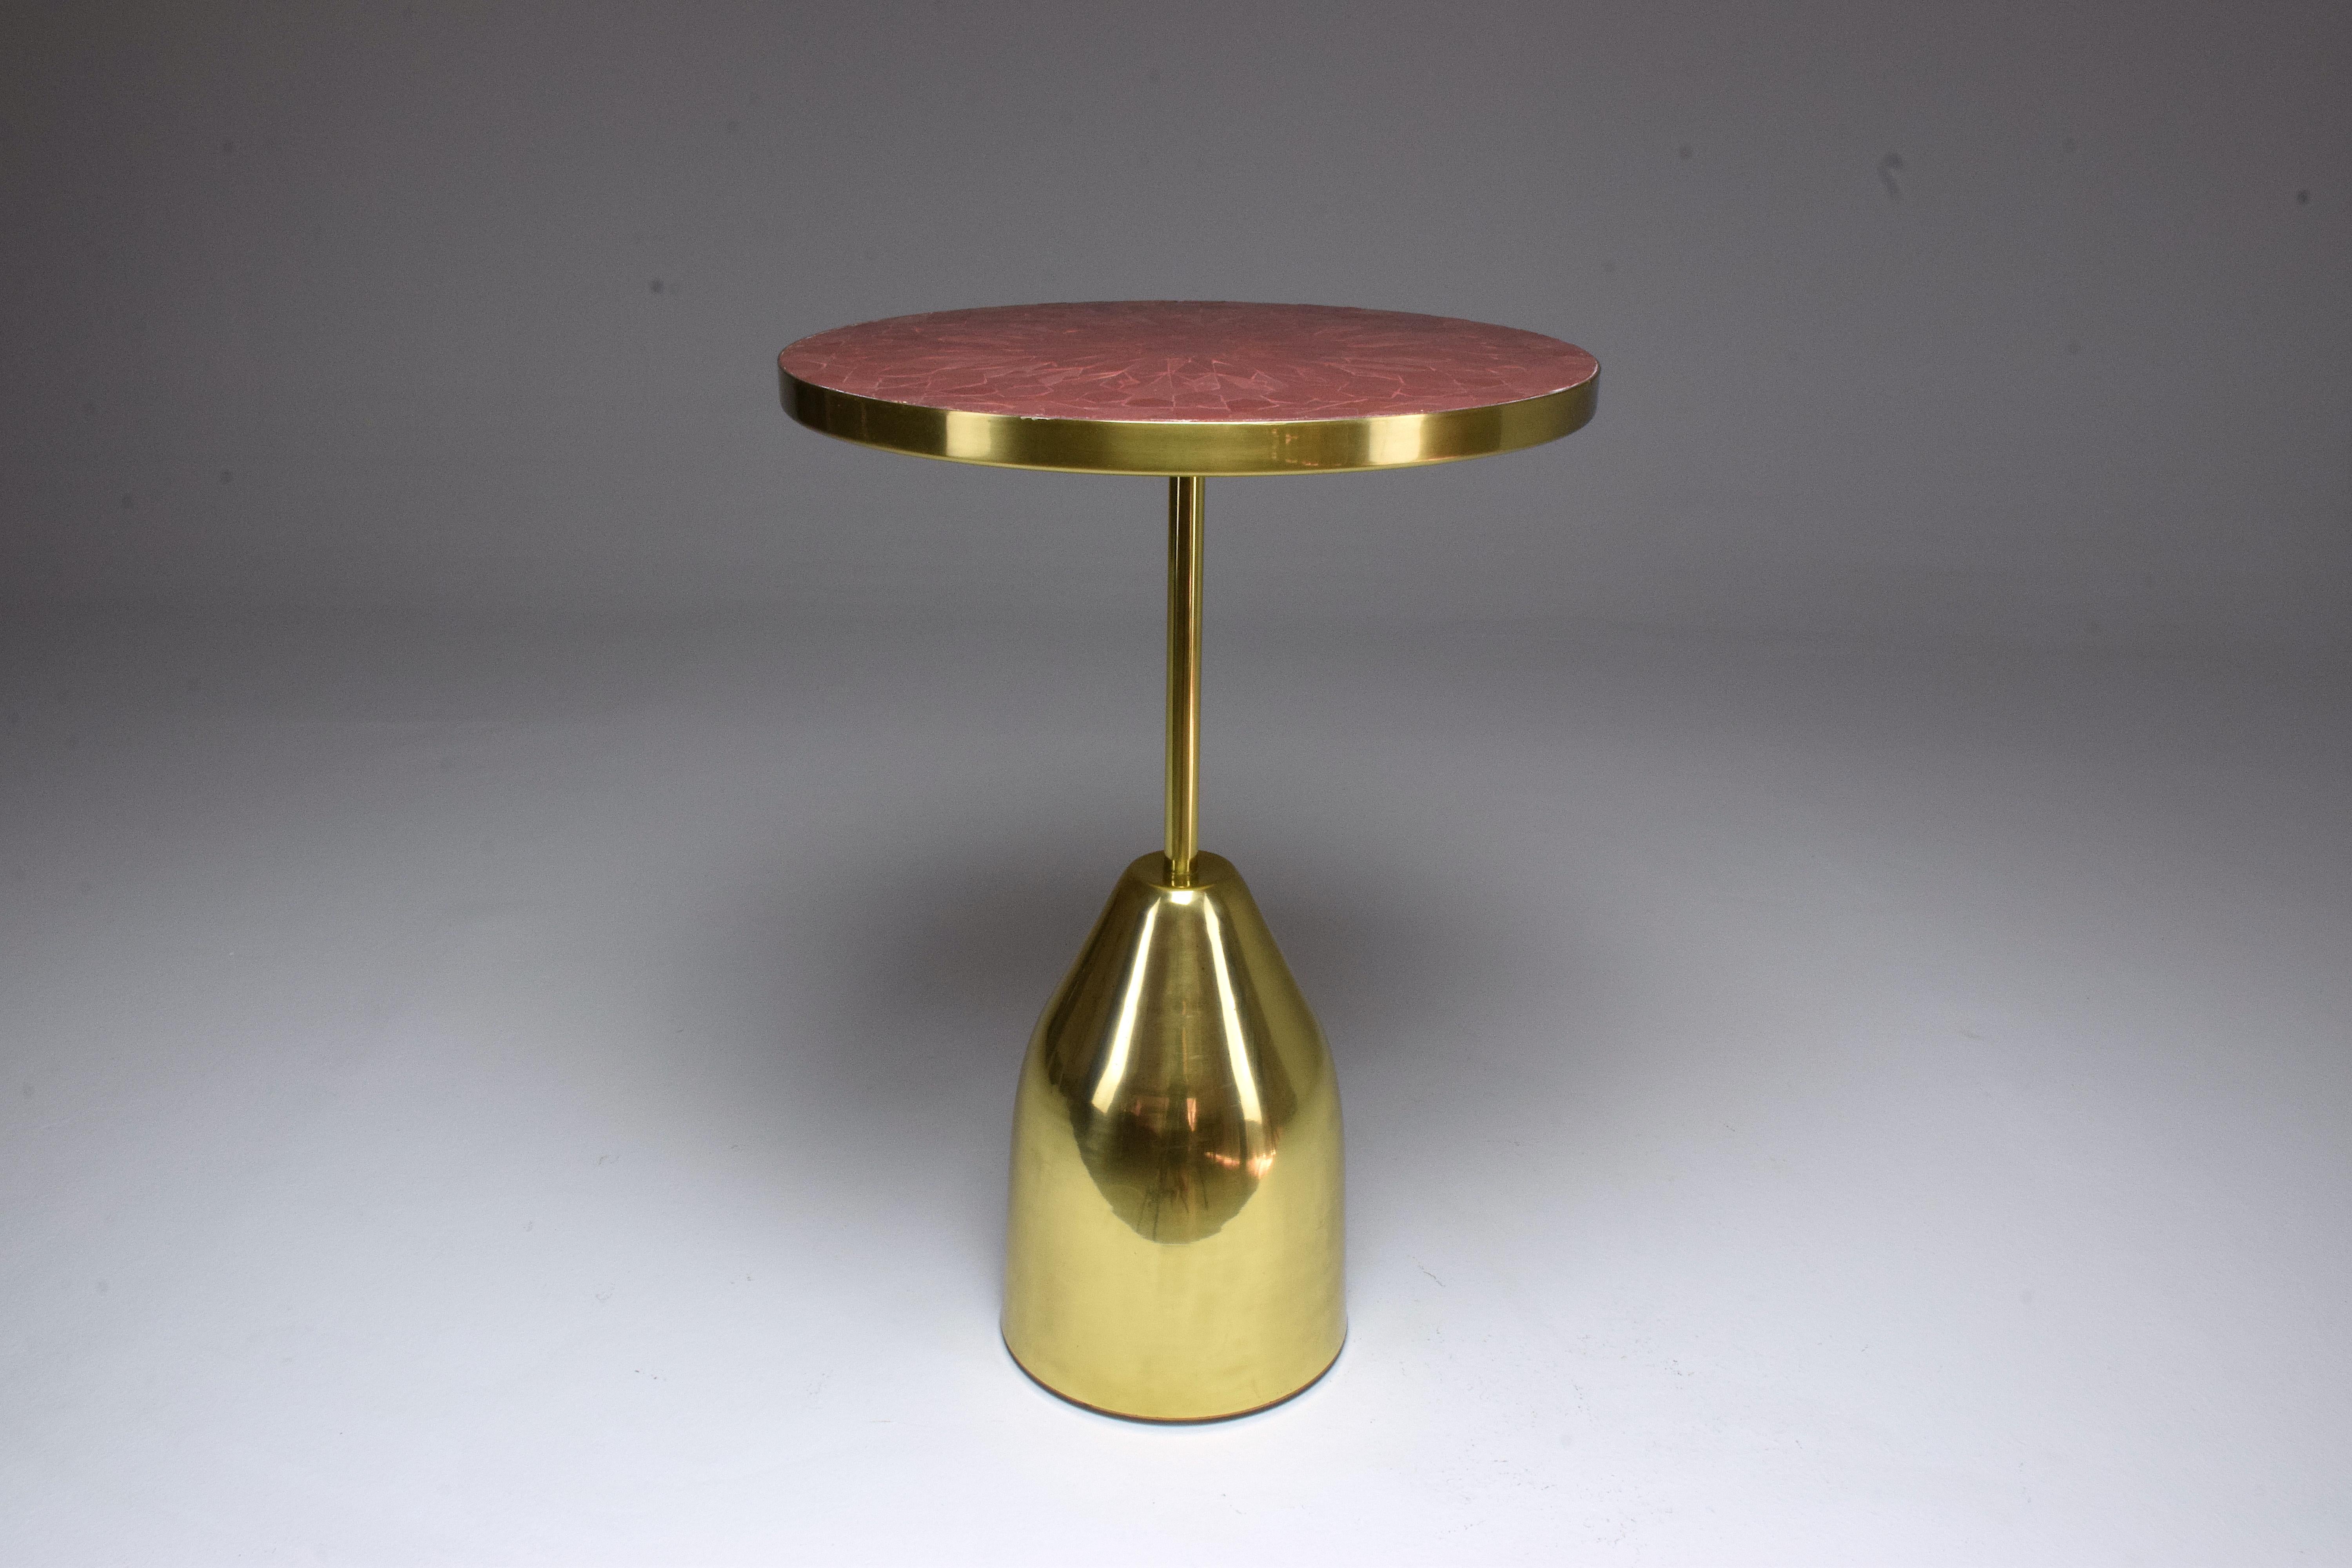 Contemporary handcrafted guéridon side table composed of a solid gold brass structure and designed with an intricate red mosaic tile tabletop oriental zellige design. 

Flow collection Zel.1-3-360 
21st century 
Base type 3
Solid French polished